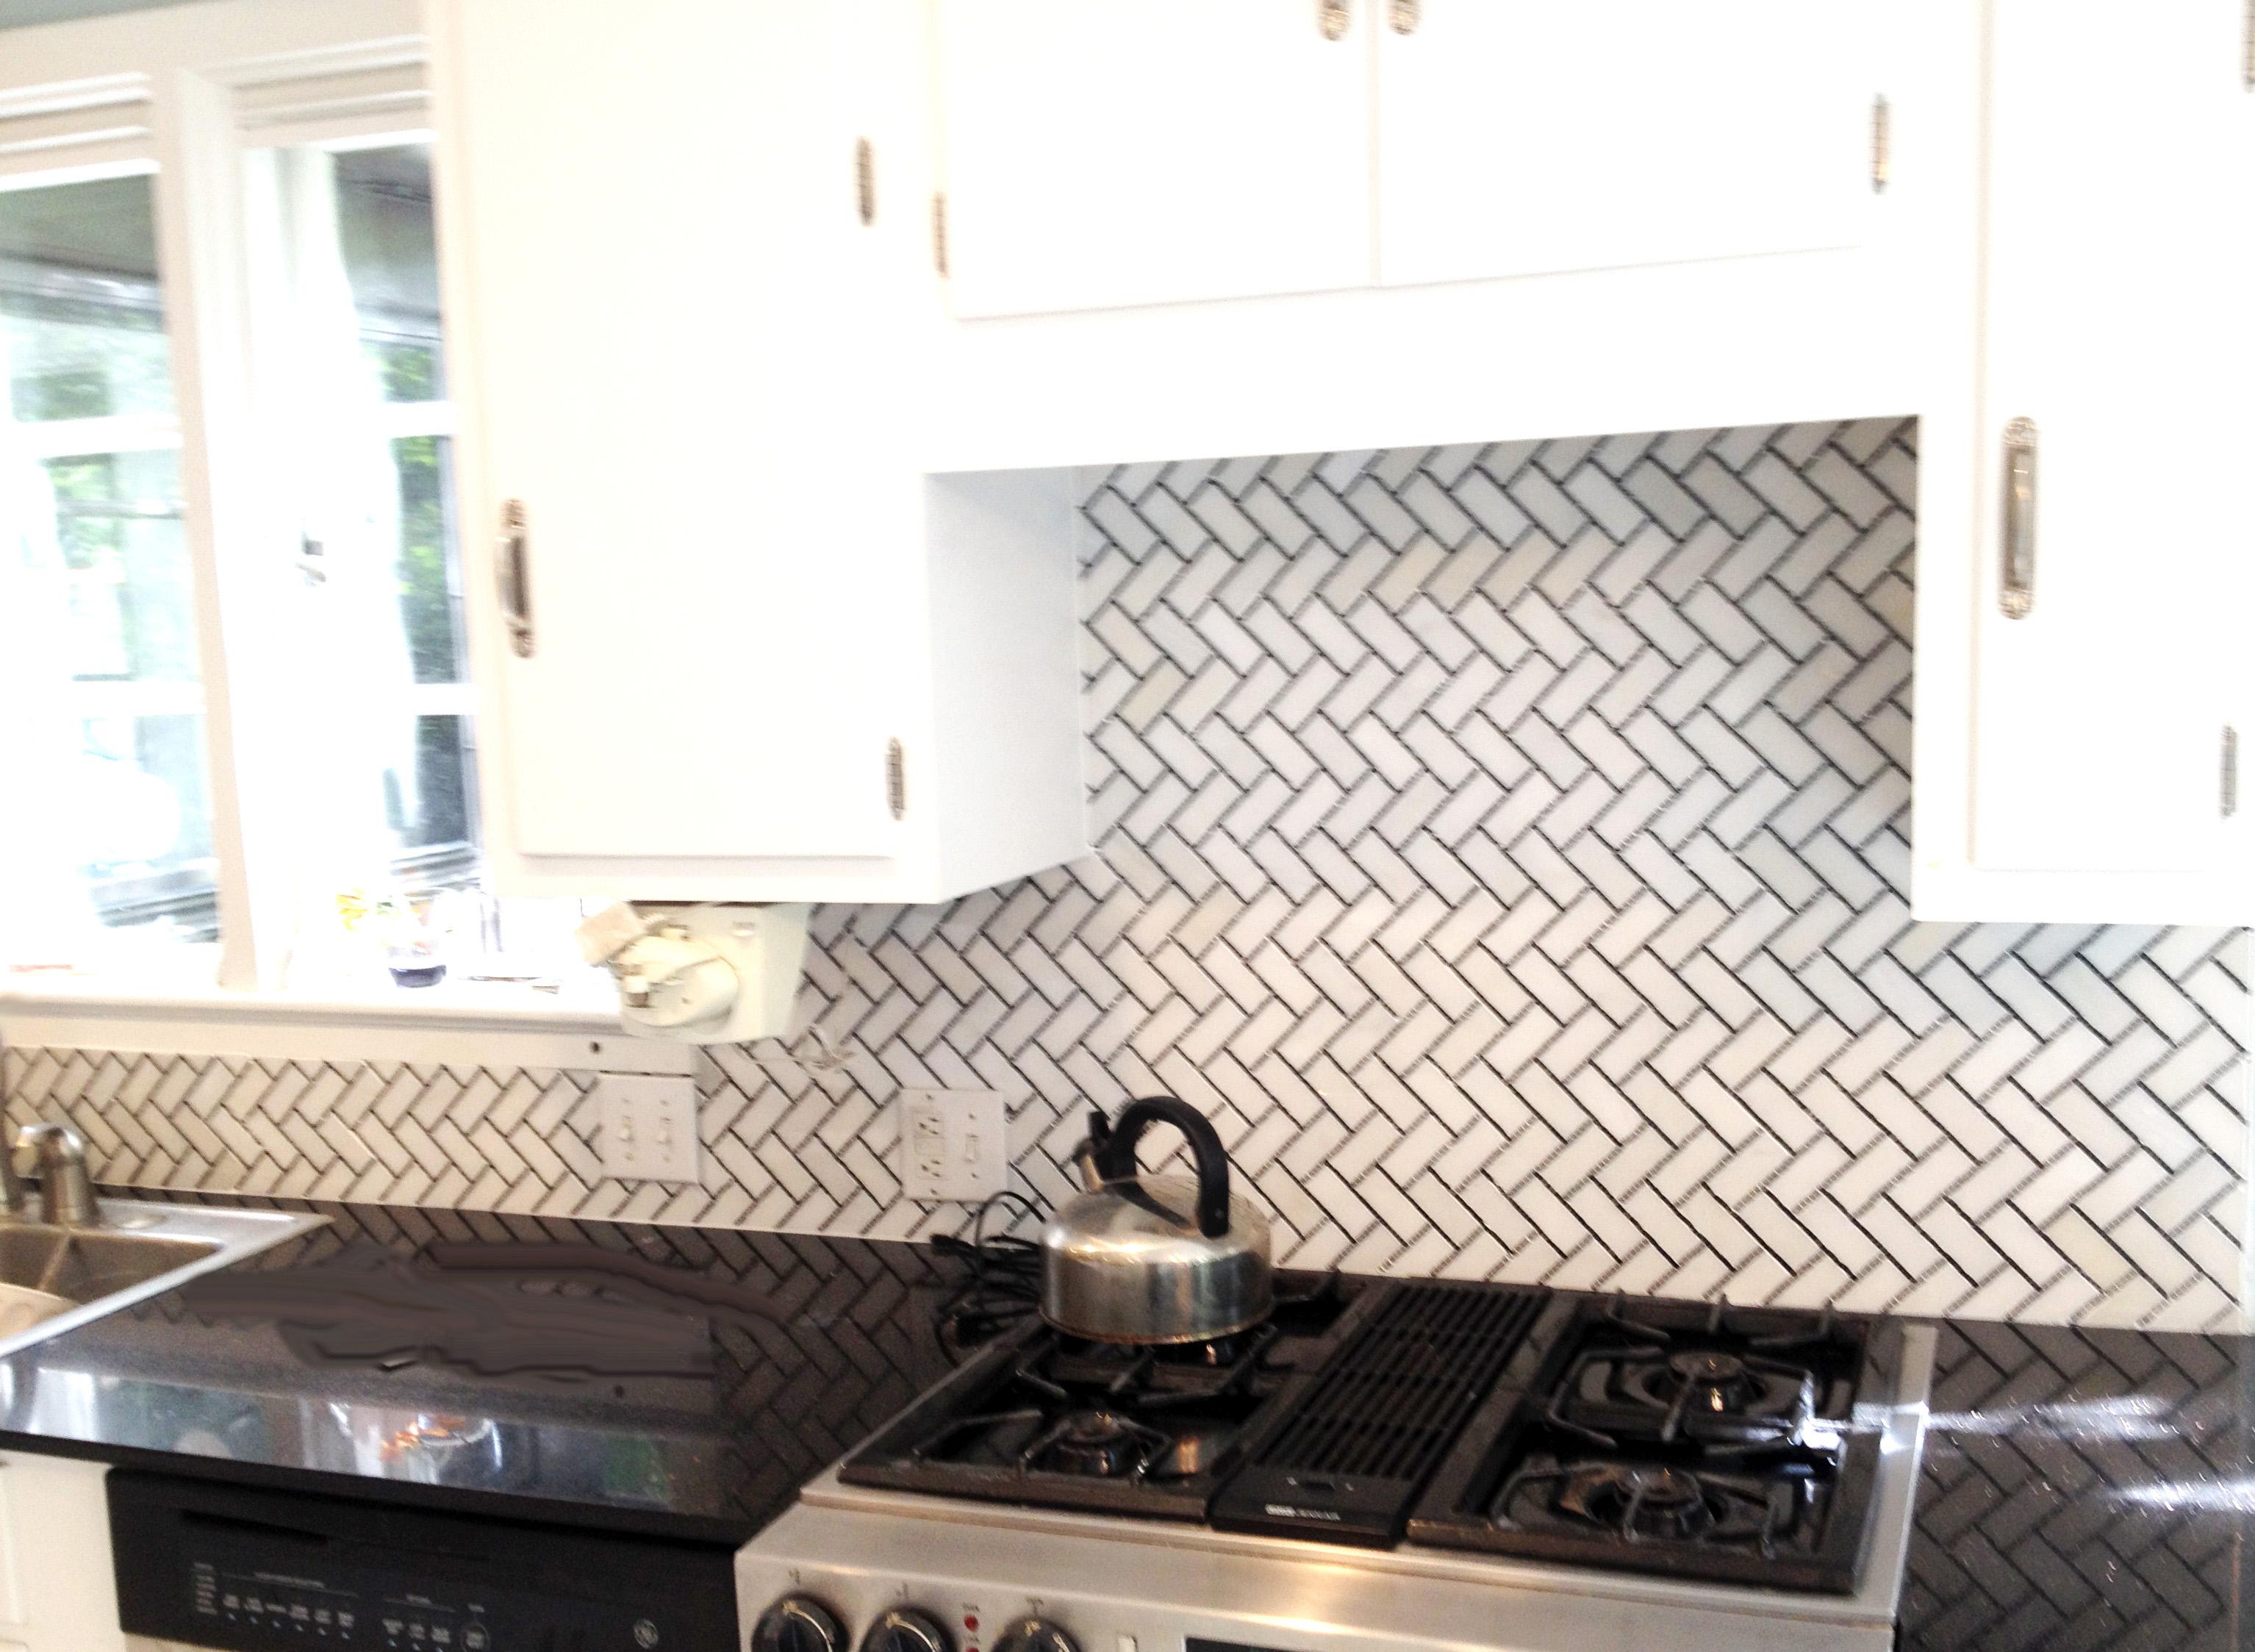 Back splash was change to work with new black and white floor